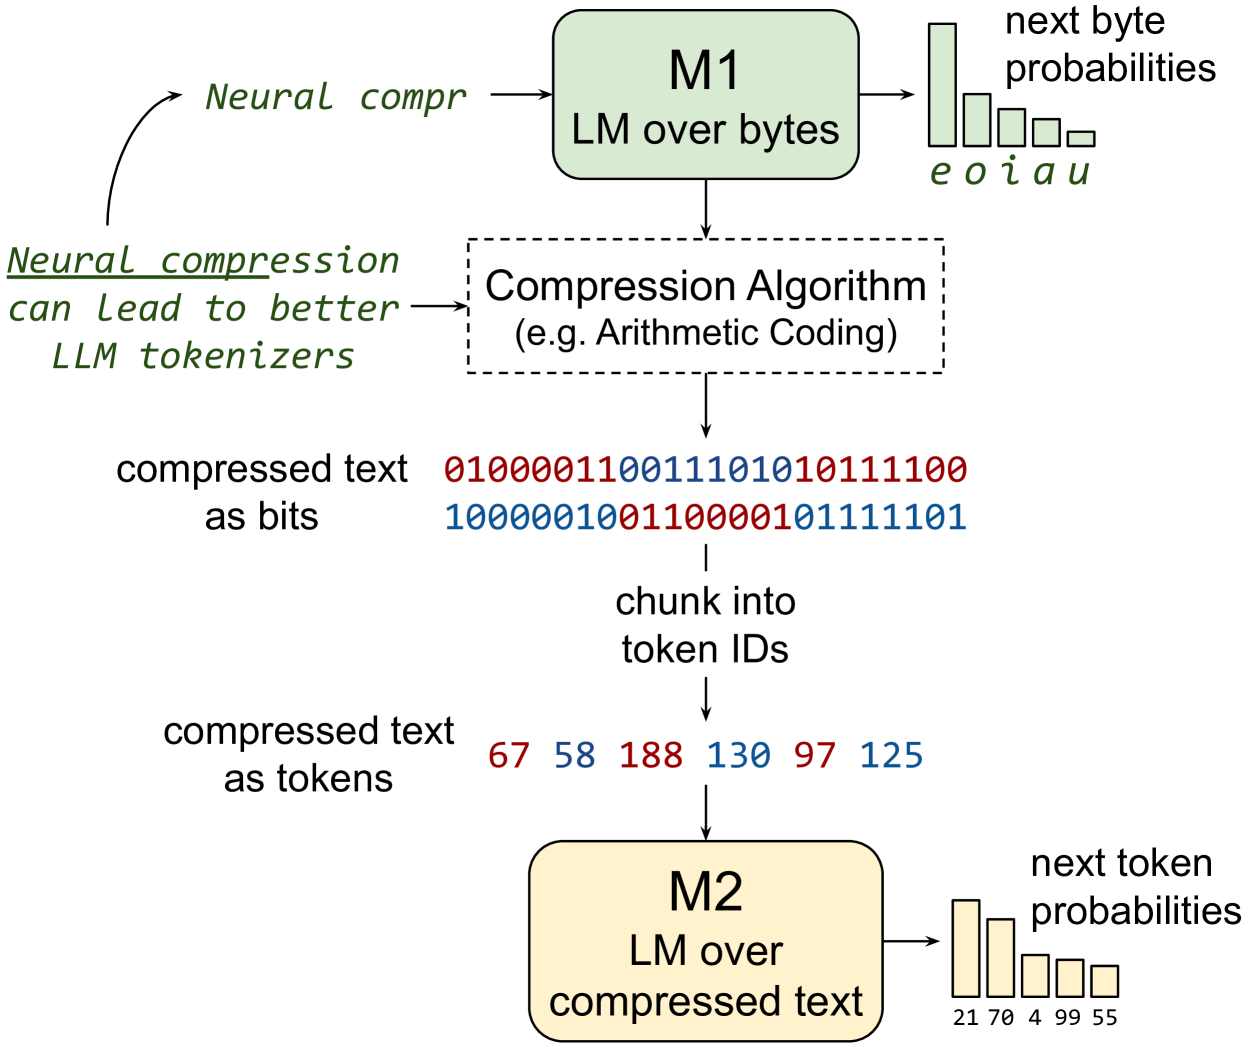 Training LLMs over Neurally Compressed Text